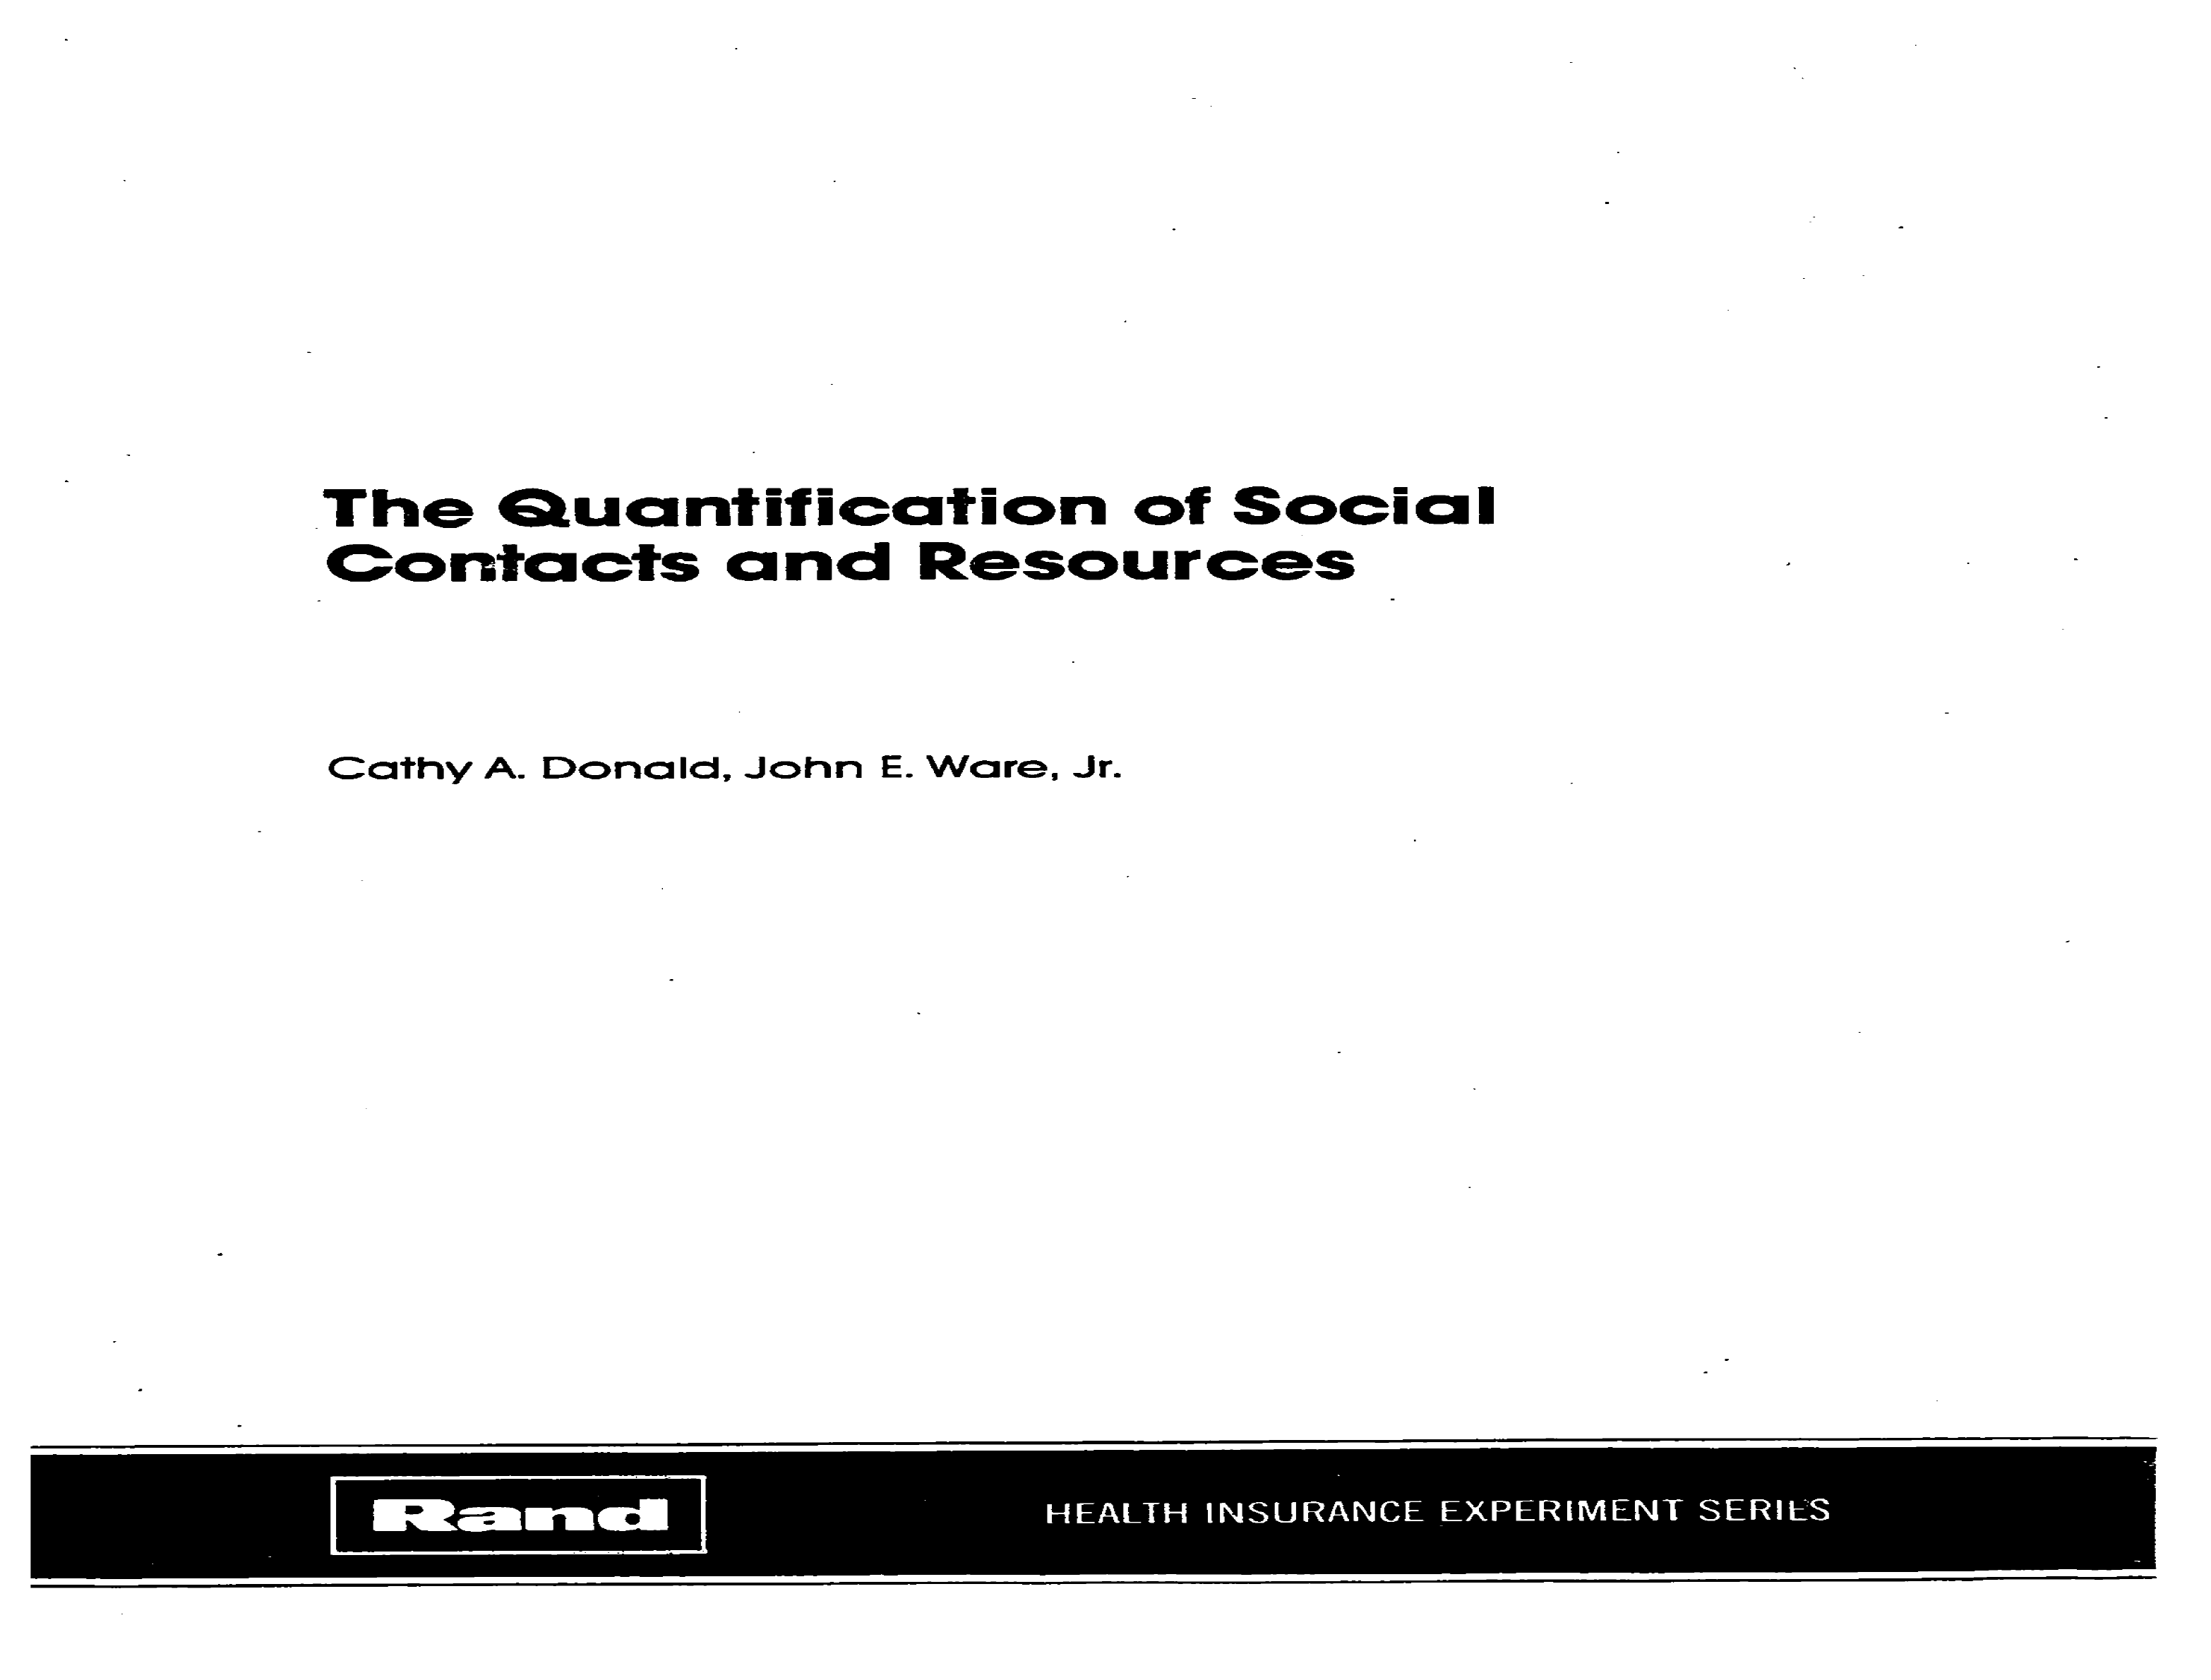 The Quantification of Social Contacts and Resources - Original PDF